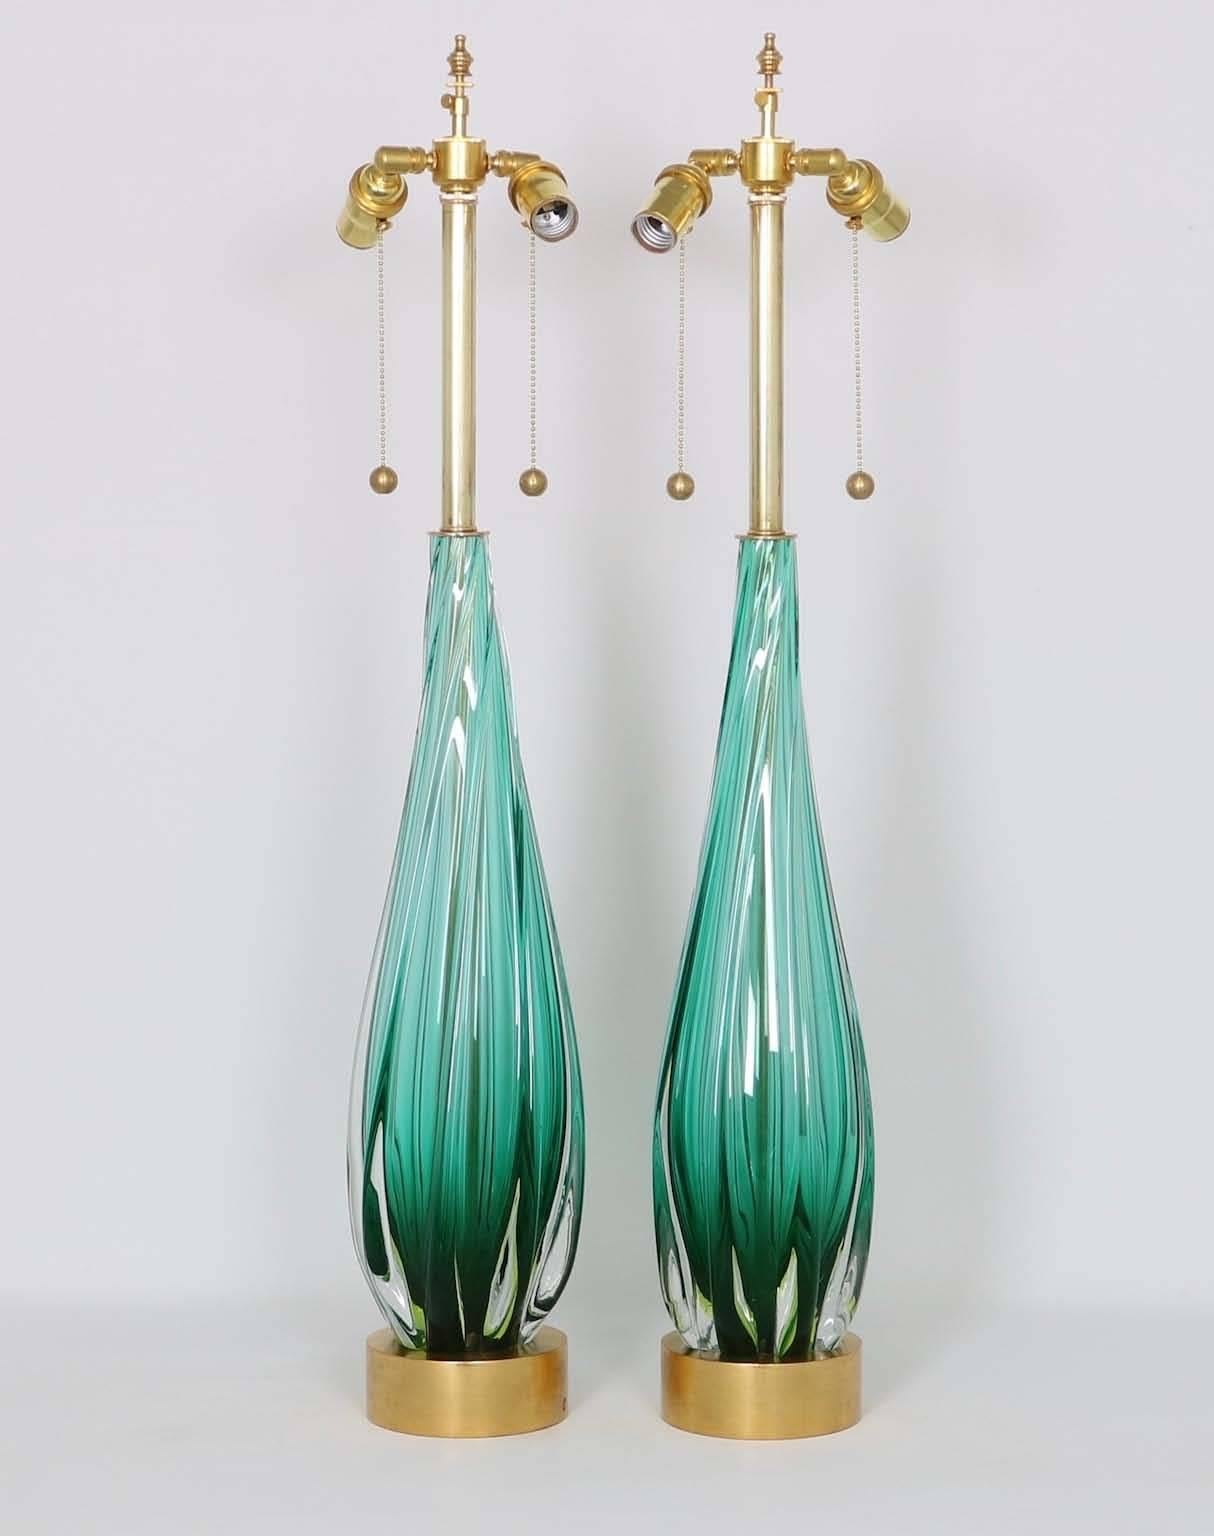 A pair of Mid-Century Modern Murano glass lamps by Seguso, produced circa 1950s, each drop form in green with clear Sommerso layer, mounted on a gilded wood base. The noted height is to the finial, the height to the top of the glass body is 23 in.